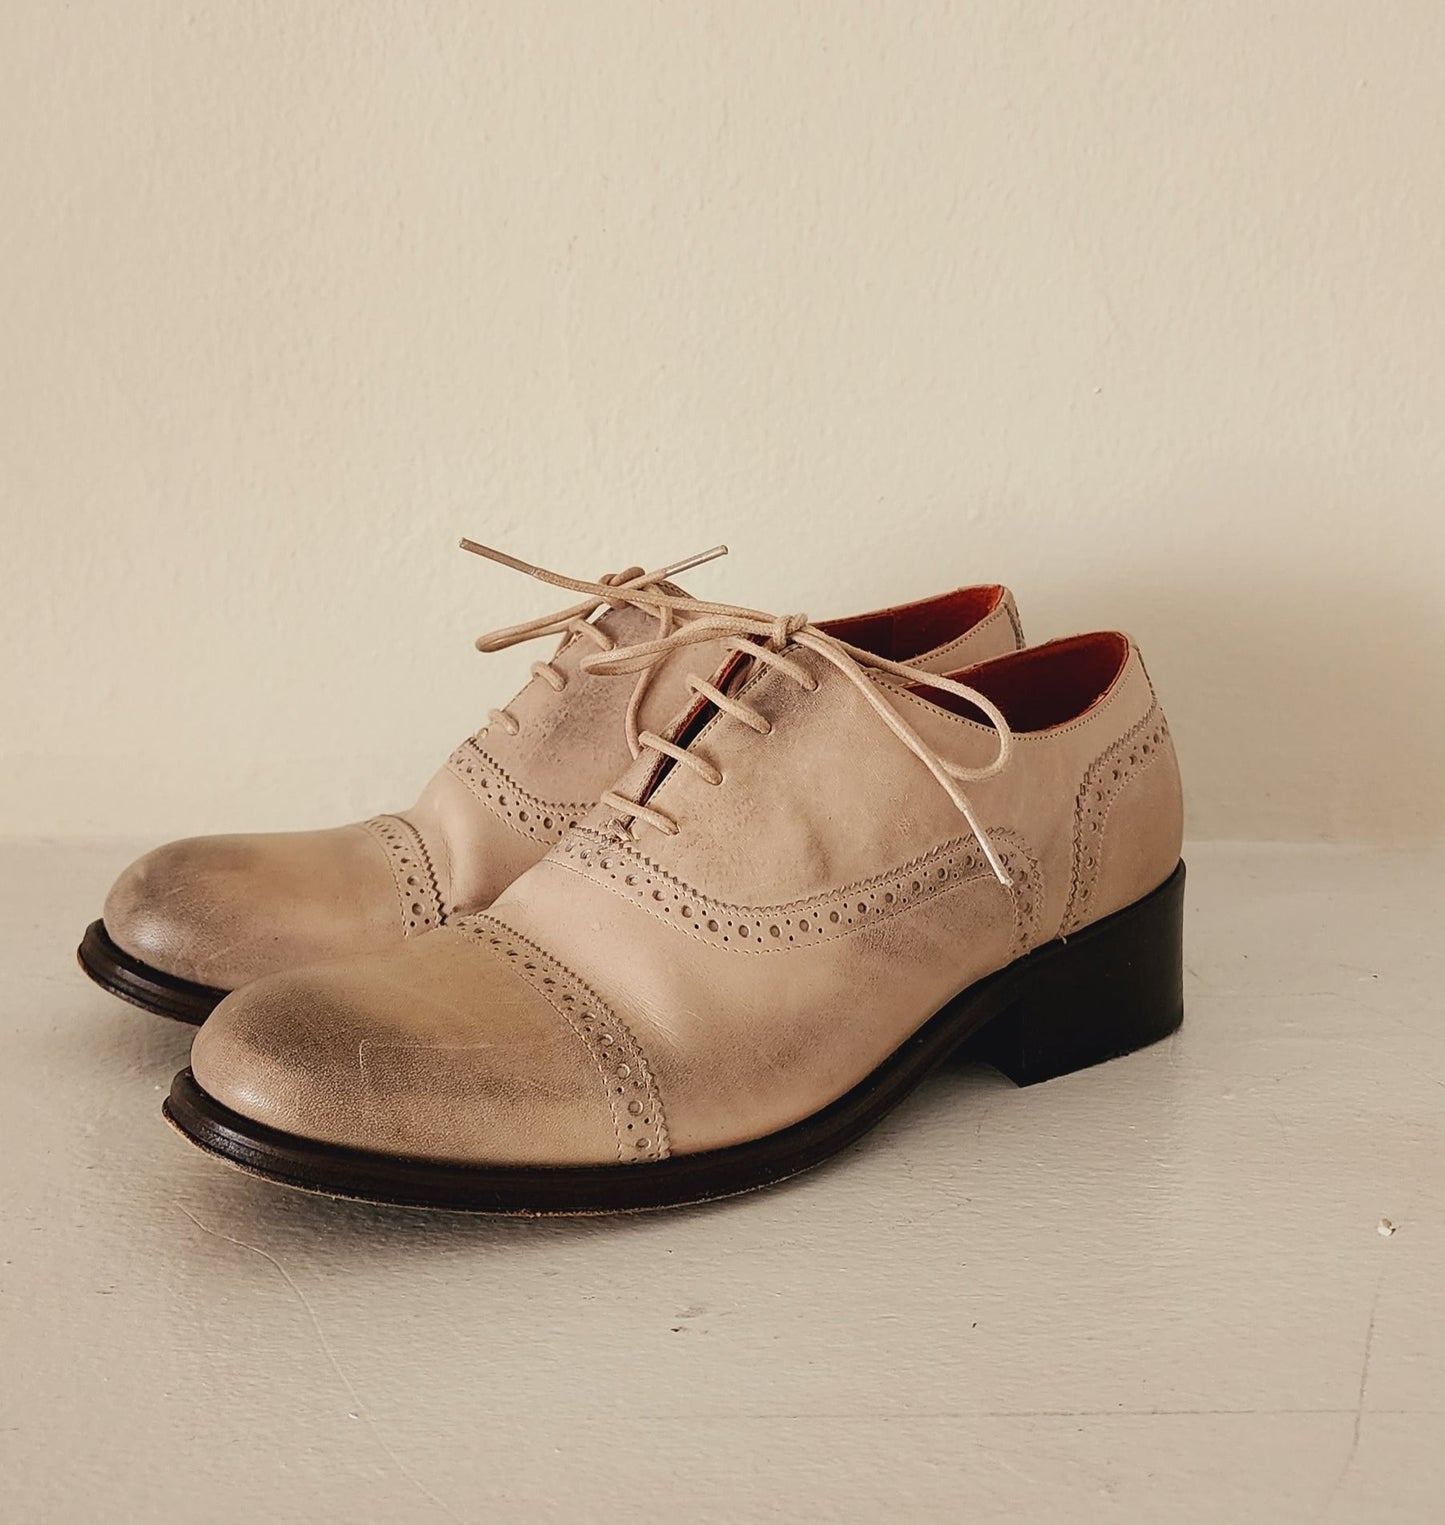 Cream Leather Lace-Up Oxfords Shoes by Alcala's / Womens 9